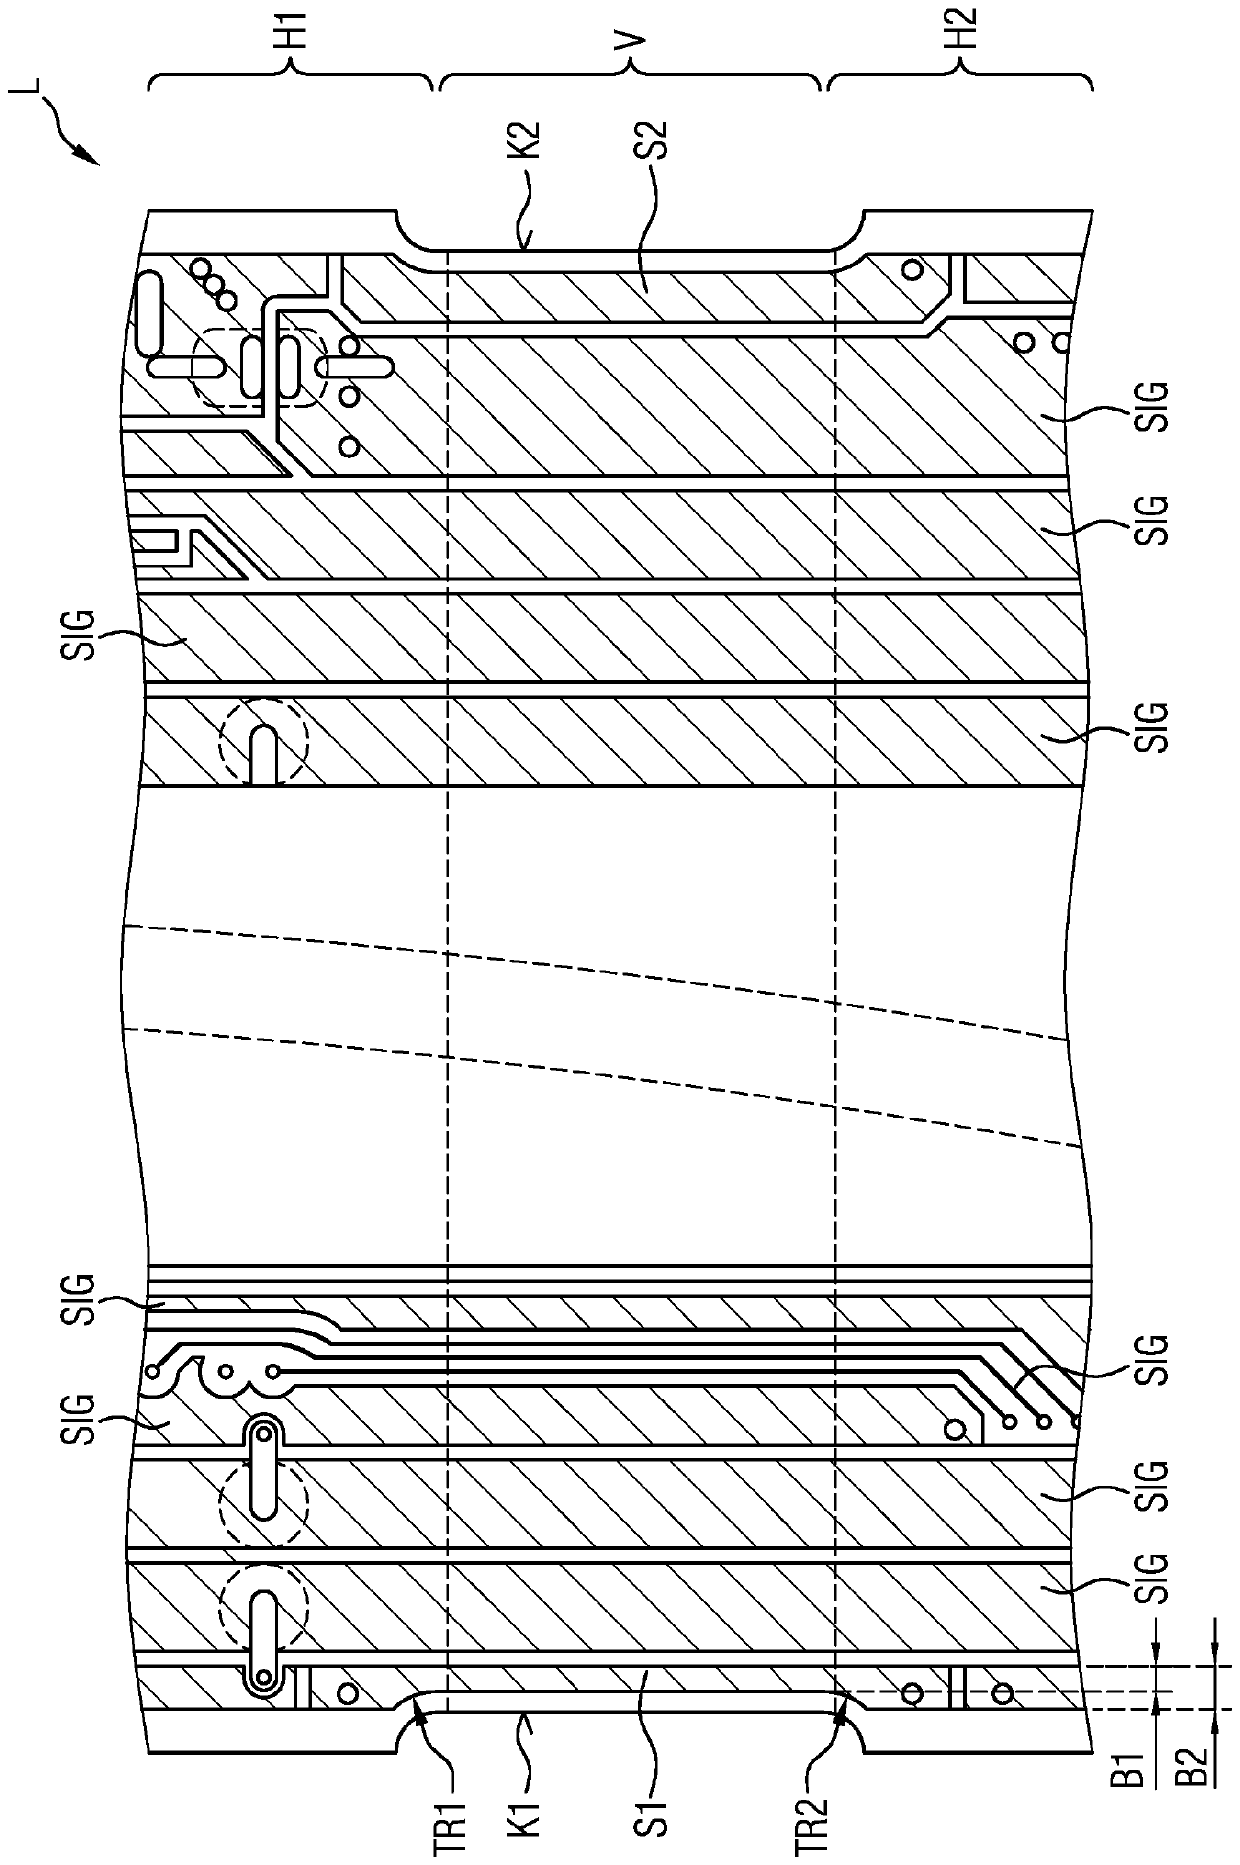 PRINTED CIRCUIT BOARD WITH BENT CONNECTING SECTION AND METHOD FOR TESTING or PRODUCING SAID PRINTED CIRCUIT BOARD, AND ALSO ELECTRONIC CONTROL UNIT AND METHOD FOR OPERATING SAID ELECTRONIC CONTROL UNIT